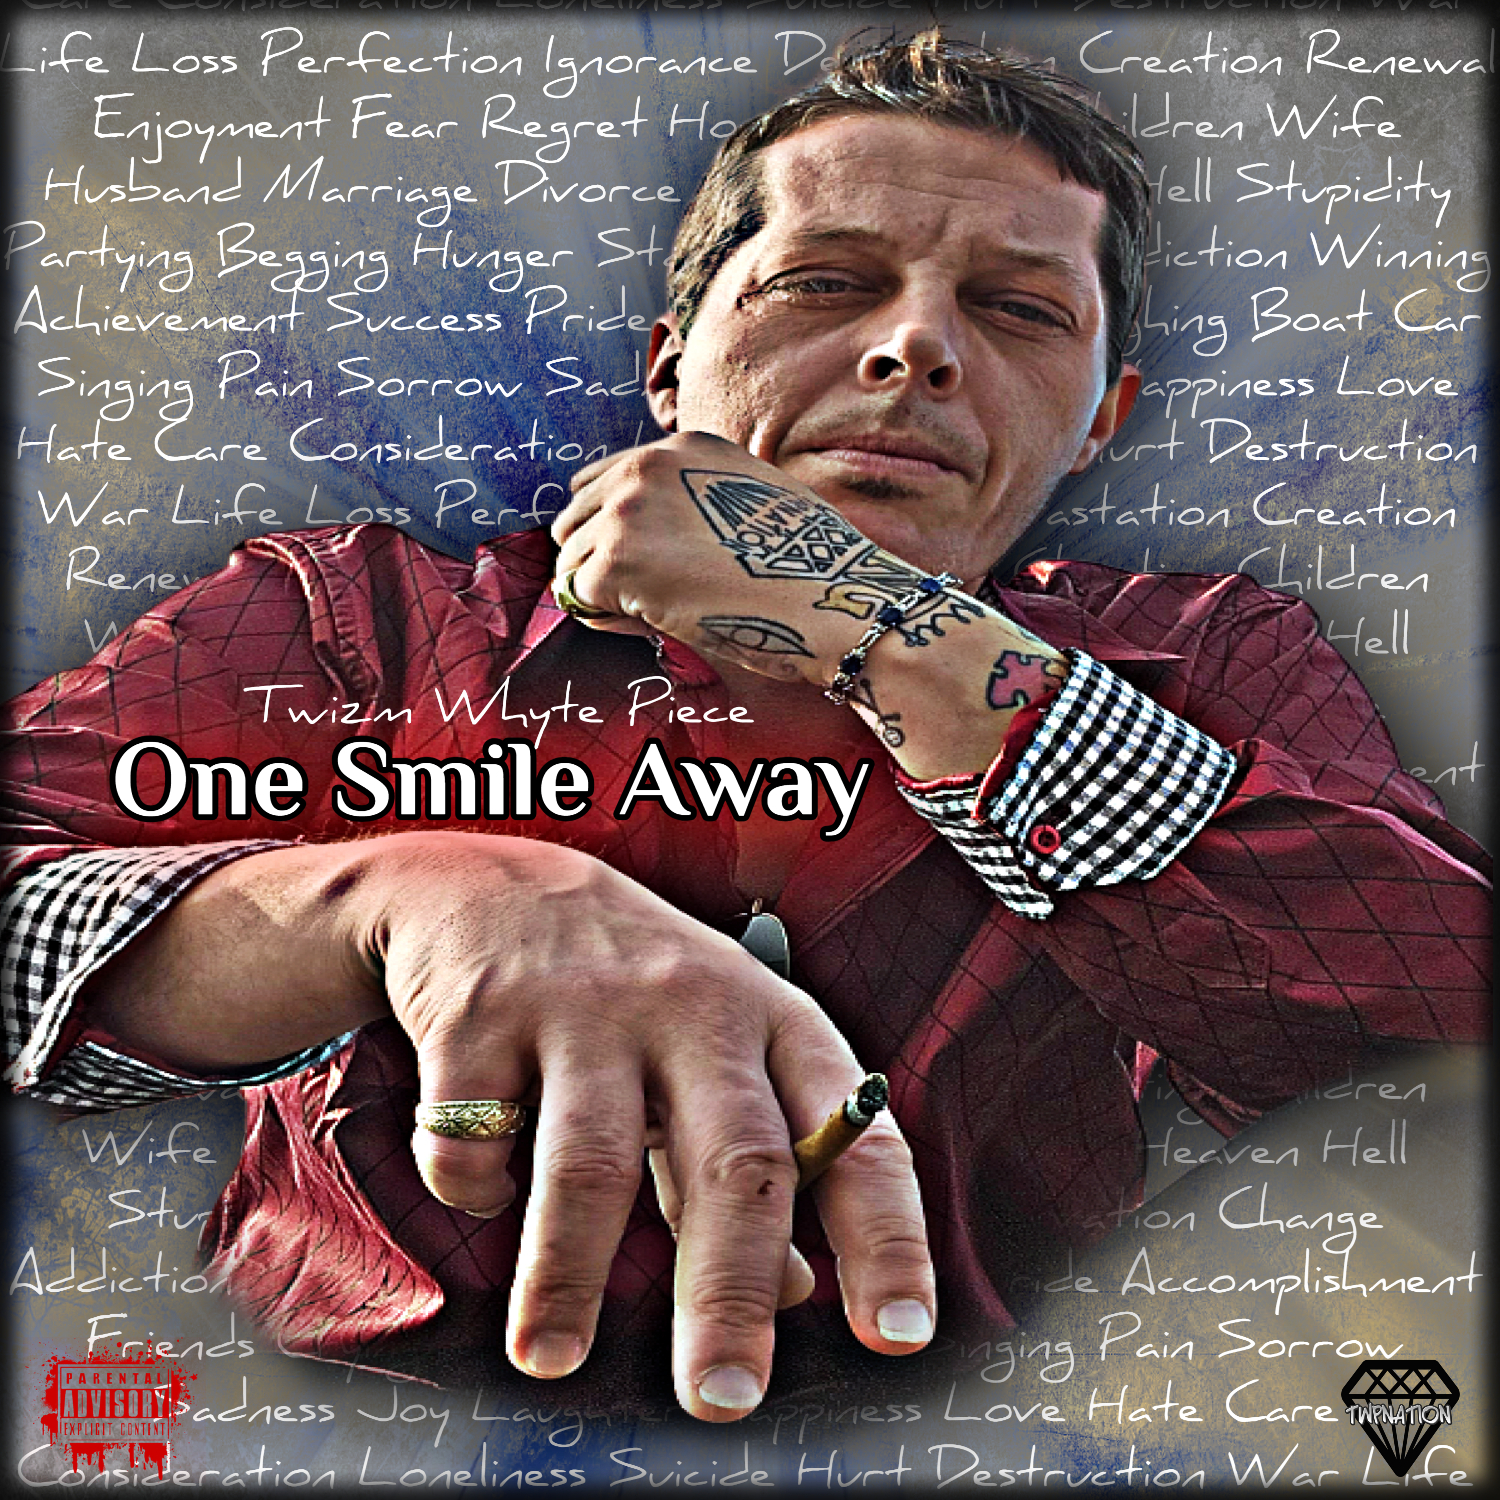 Twizm Whyte Piece To Release Highly Anticipated New Album “One Smile Away” On Monday 1/29/24